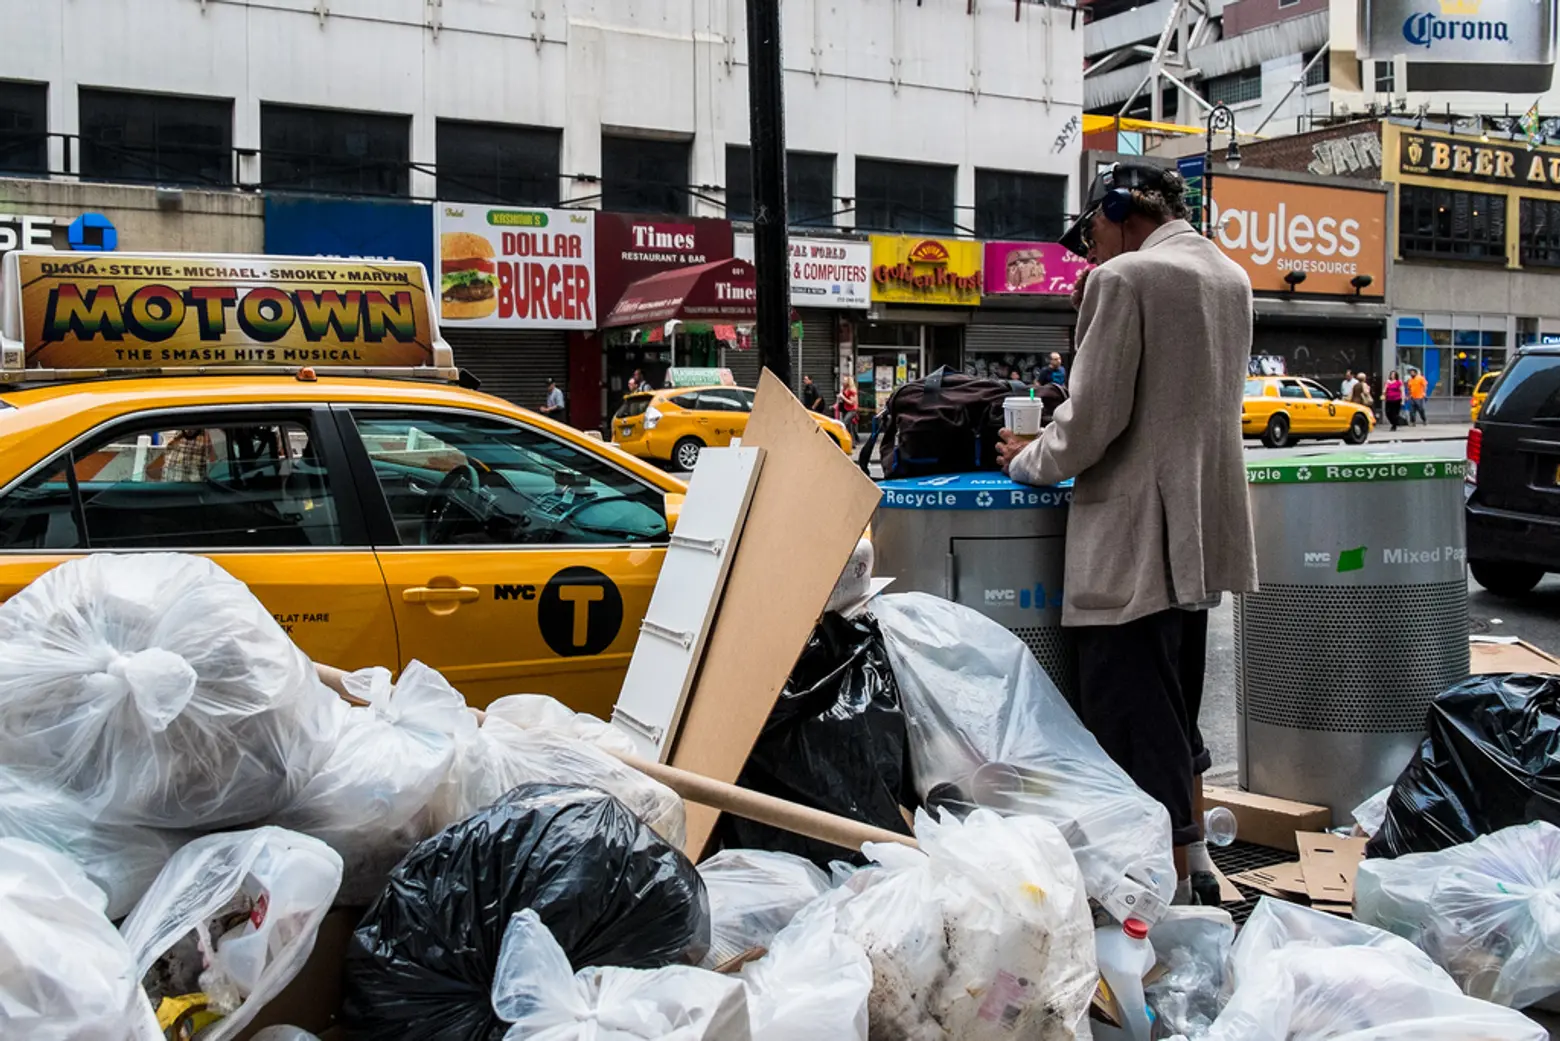 As New York City grows, so does its garbage